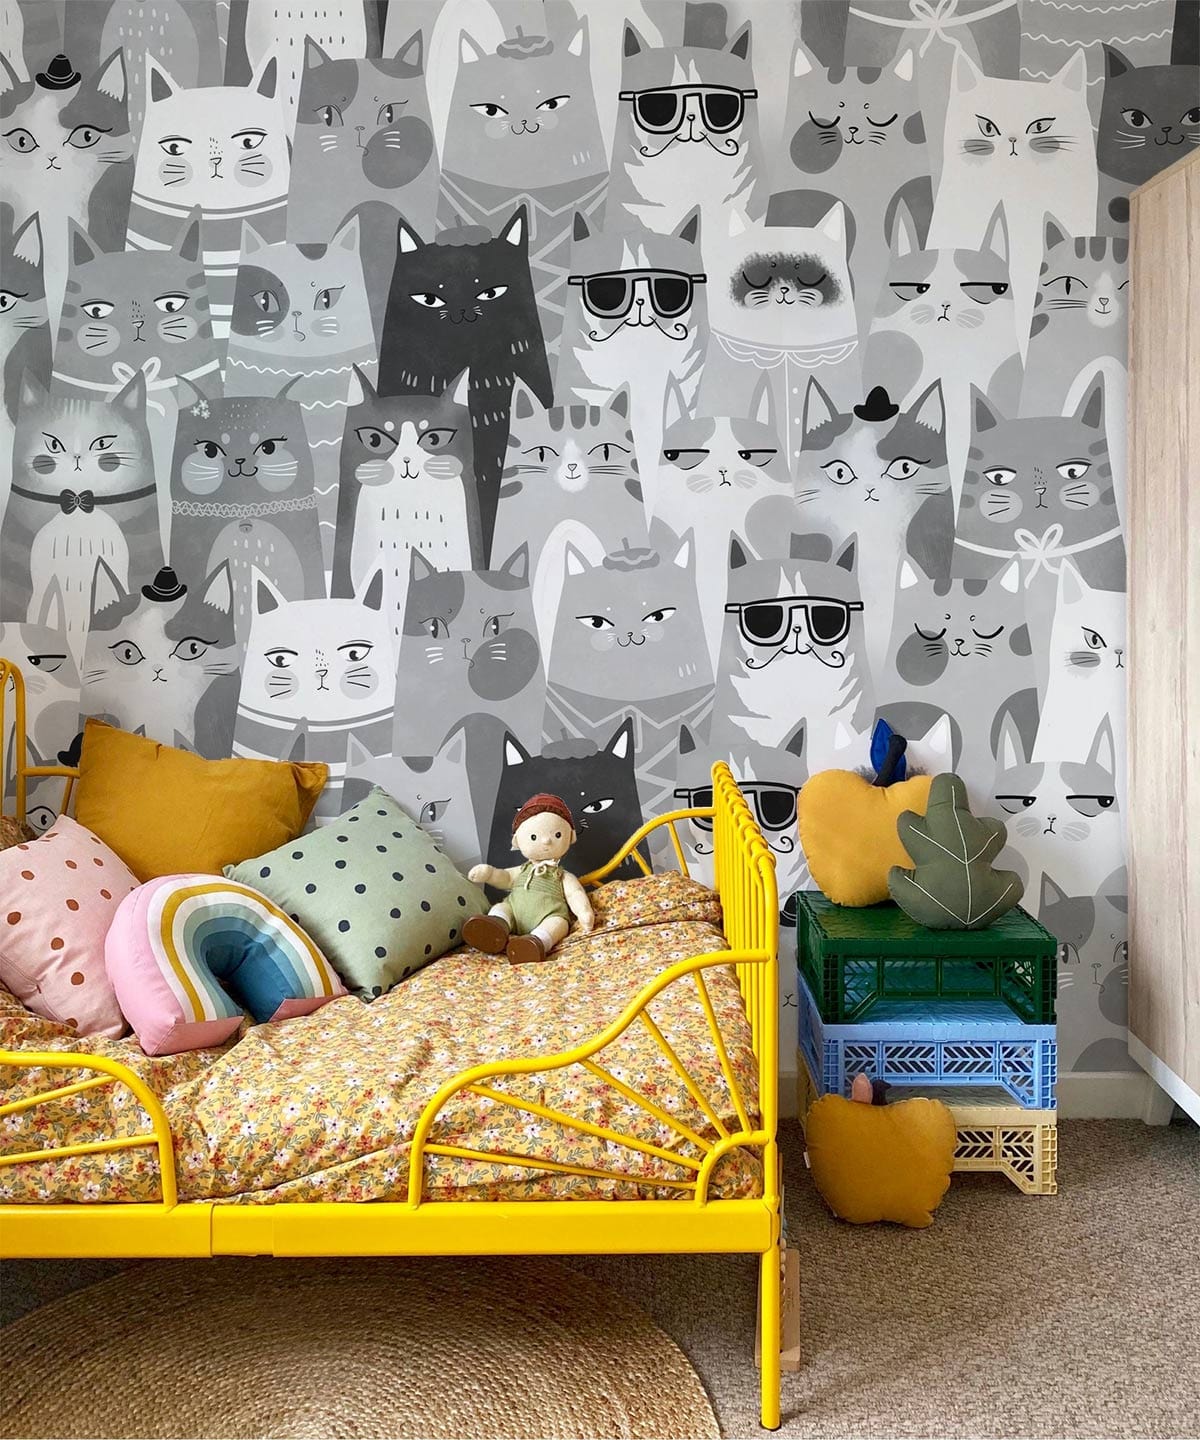 Wall Decals for Children's Rooms Depicting Various Black-and-White Kitties in Cartoon Style